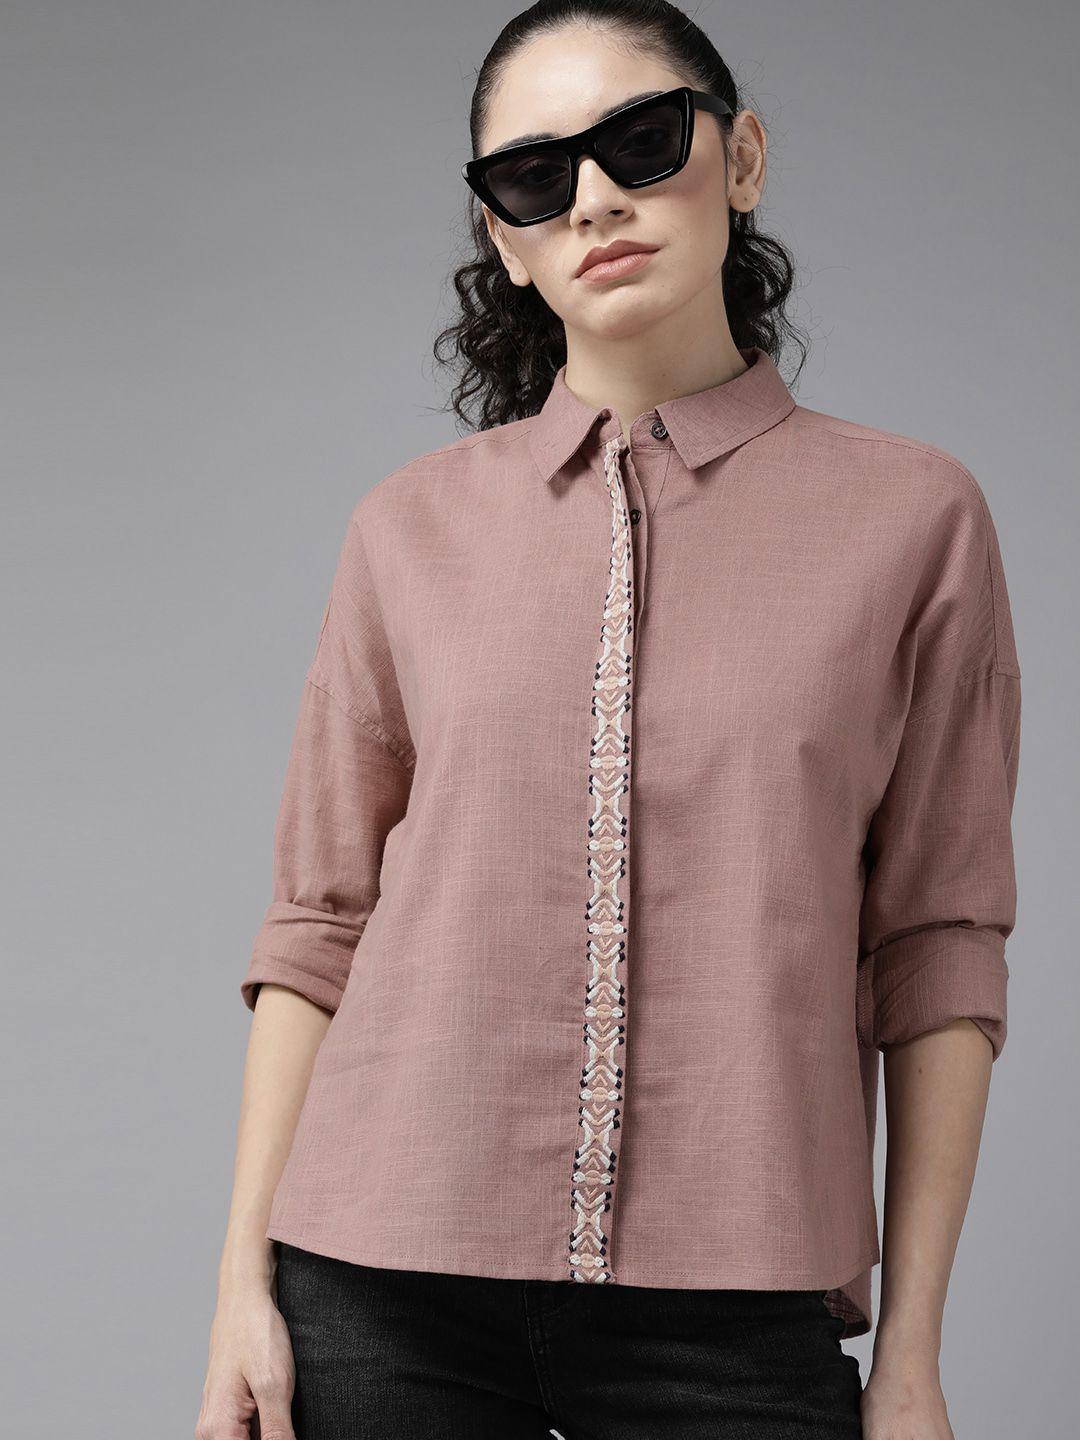 Roadster Women Embroidered Opaque Casual Shirt